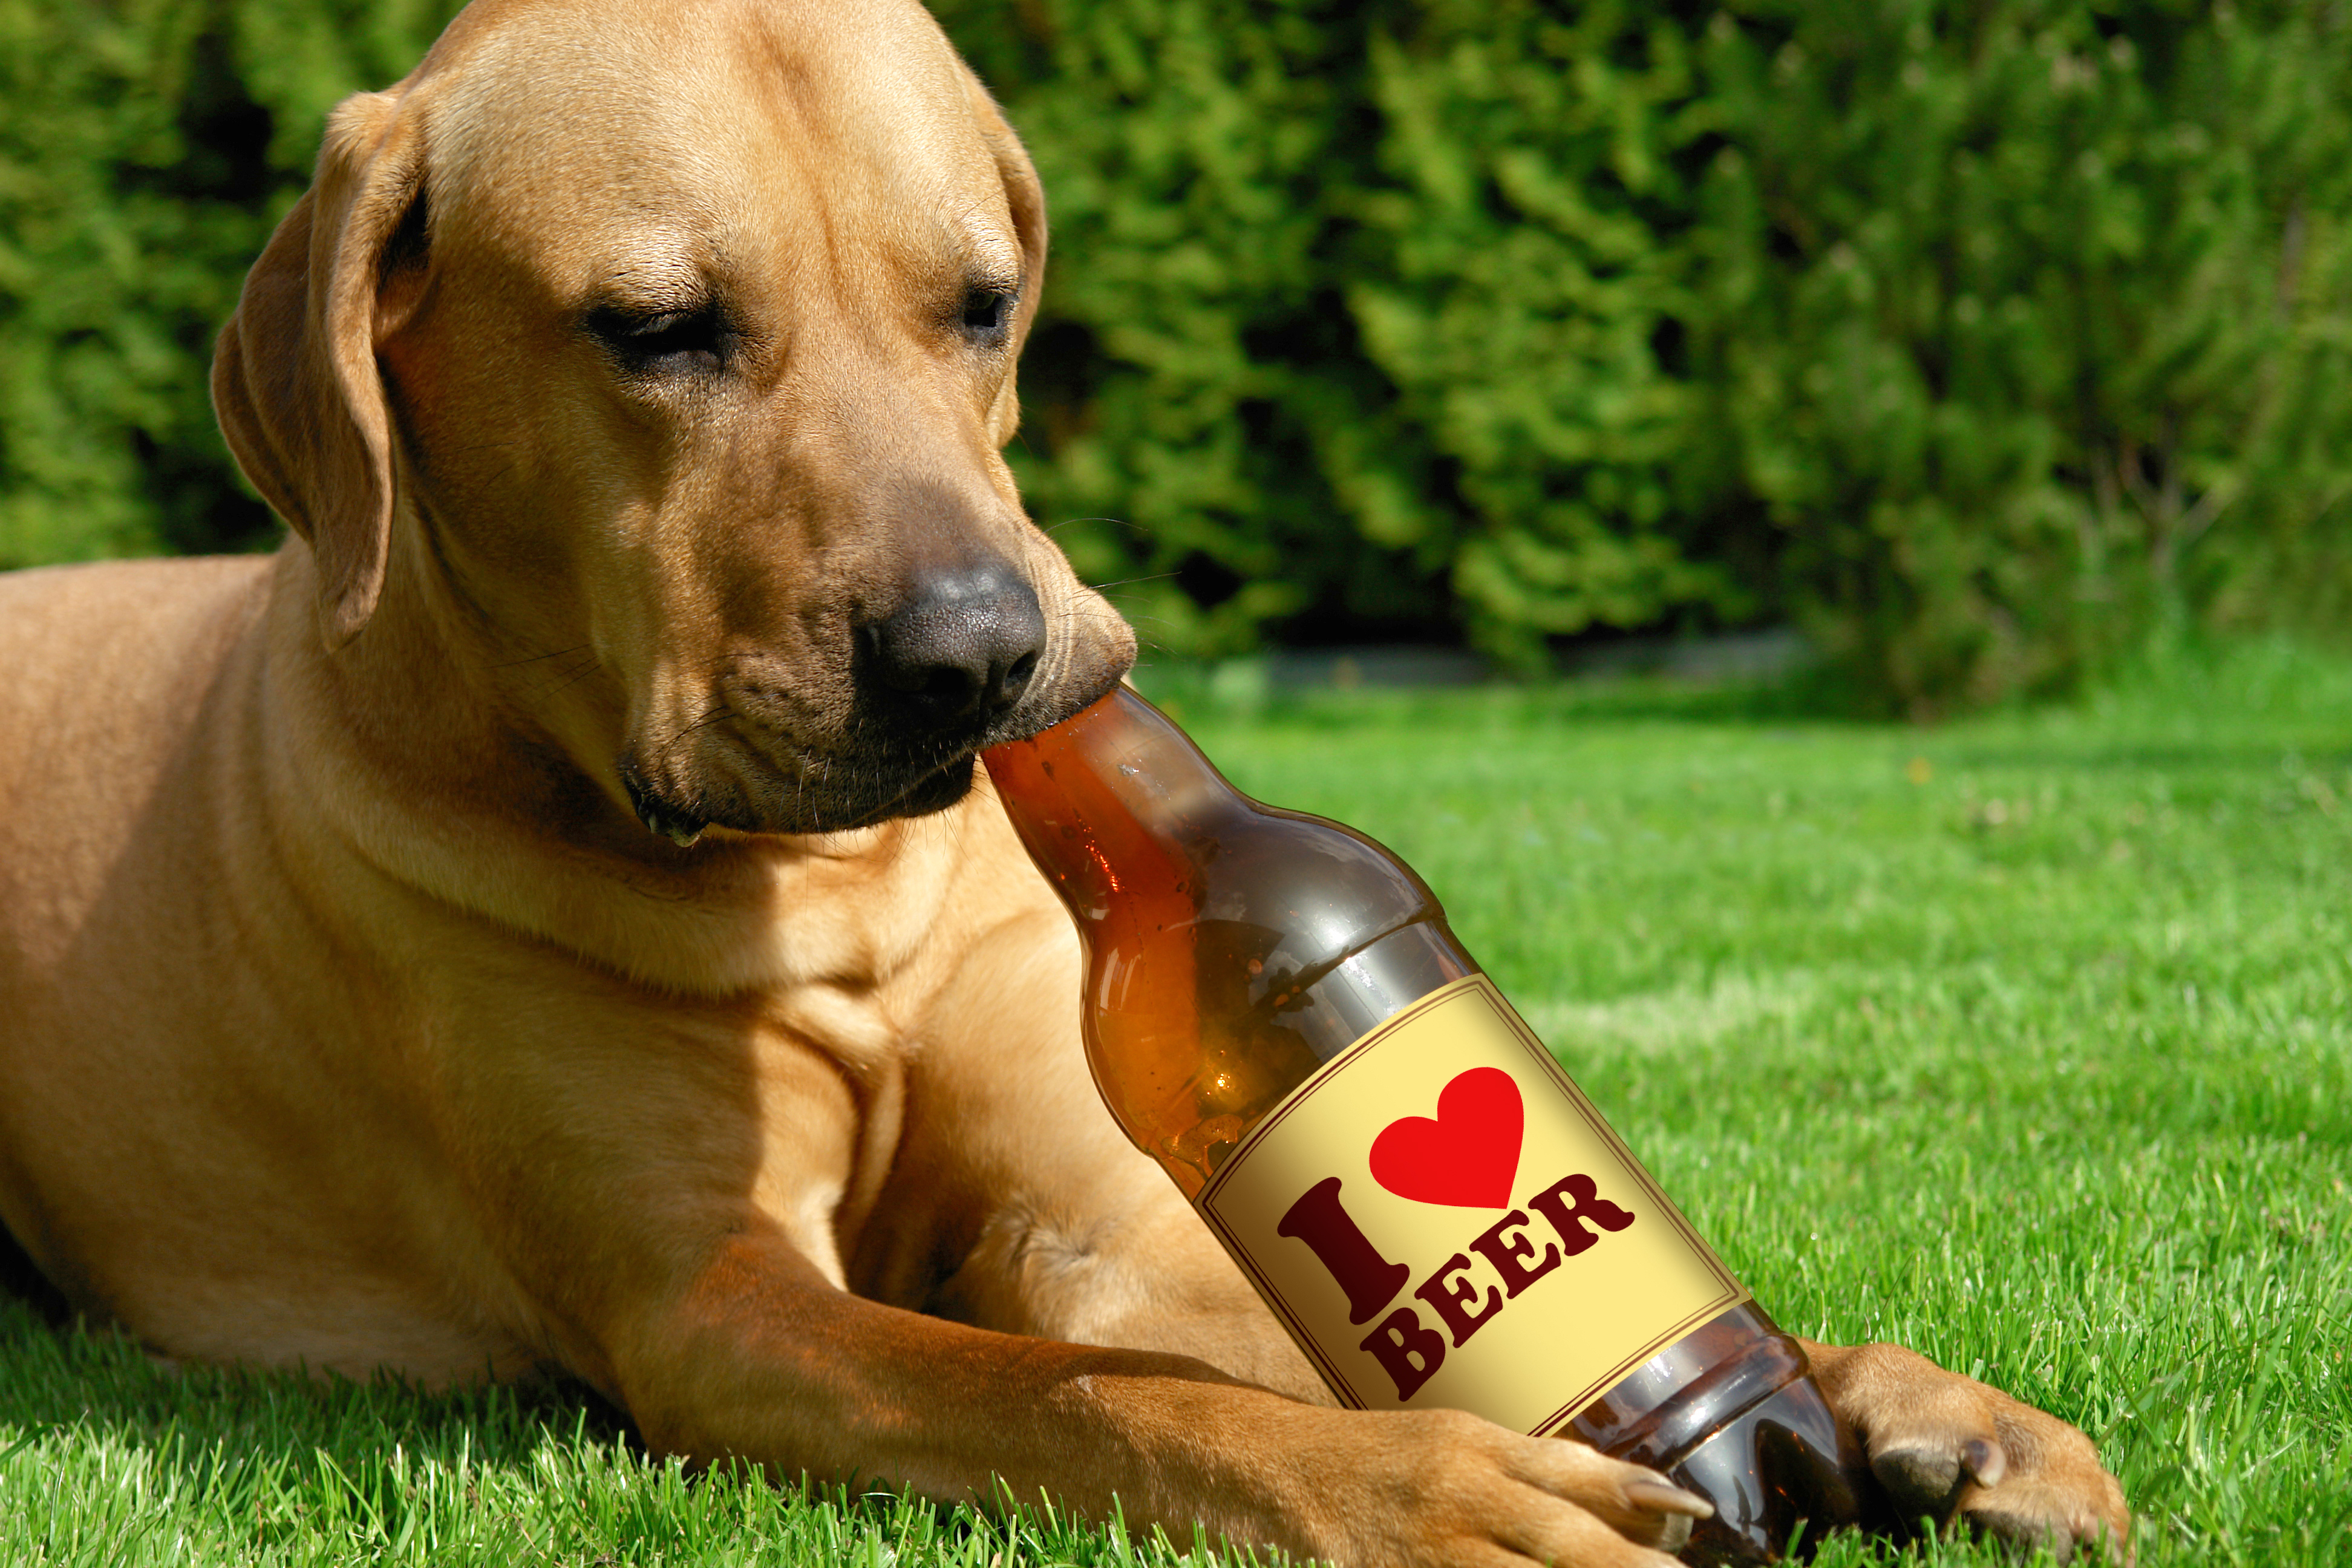 Now You Can Buy Your Dog a Craft Beer (Soft Of)